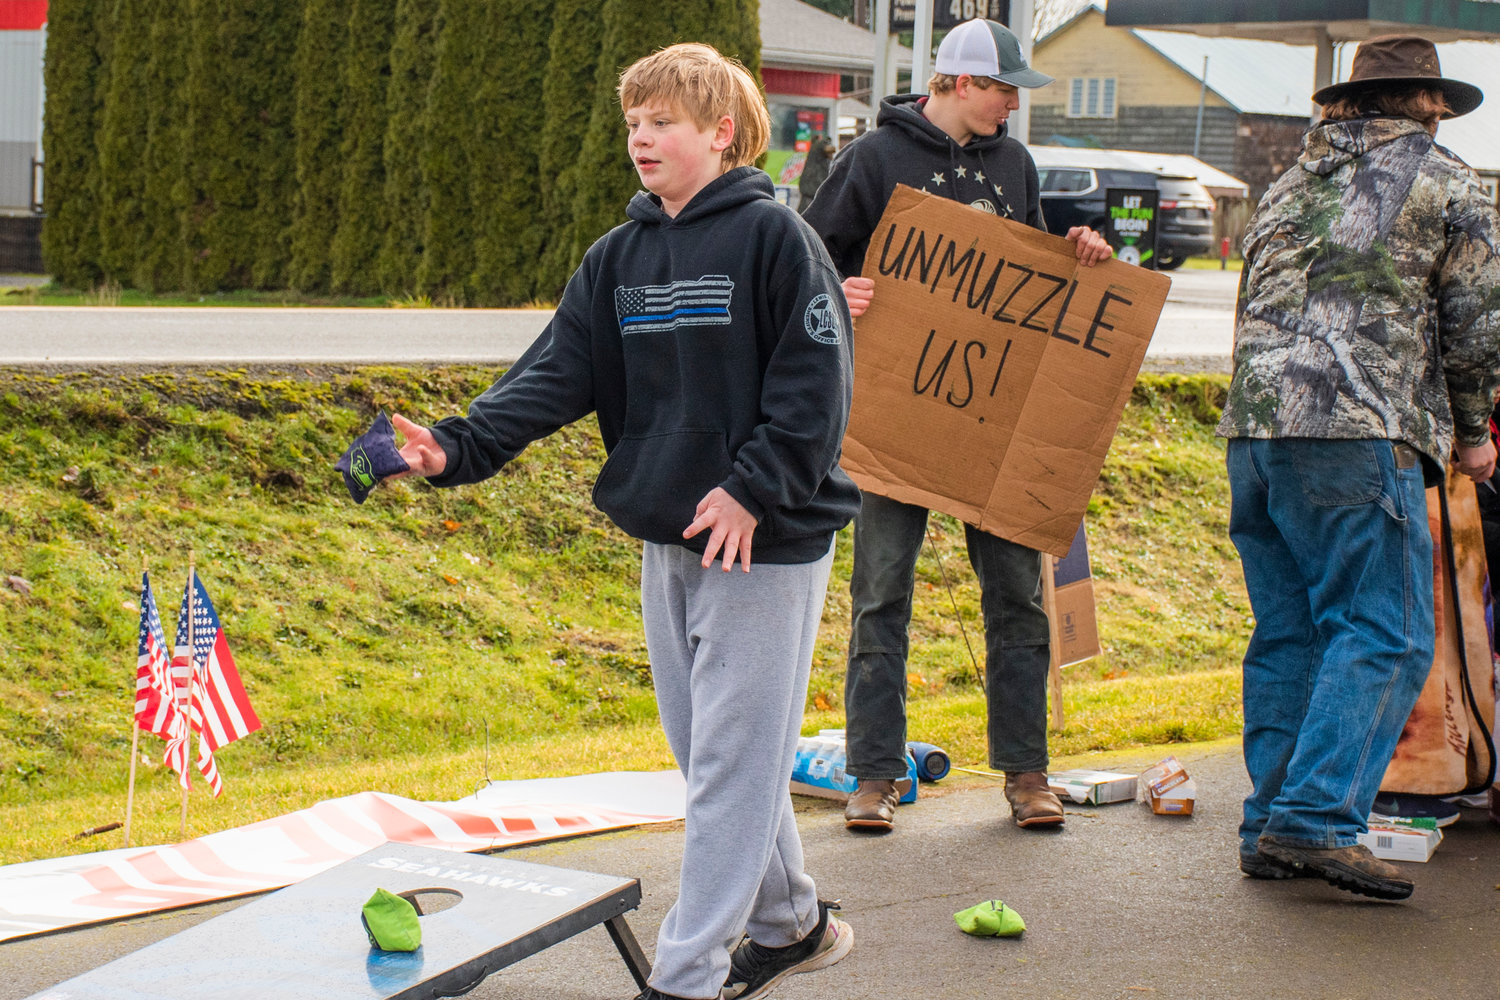 Braxton Corder, a middle school student, plays cornhole during a demonstration Wednesday outside the Pe Ell School District building.